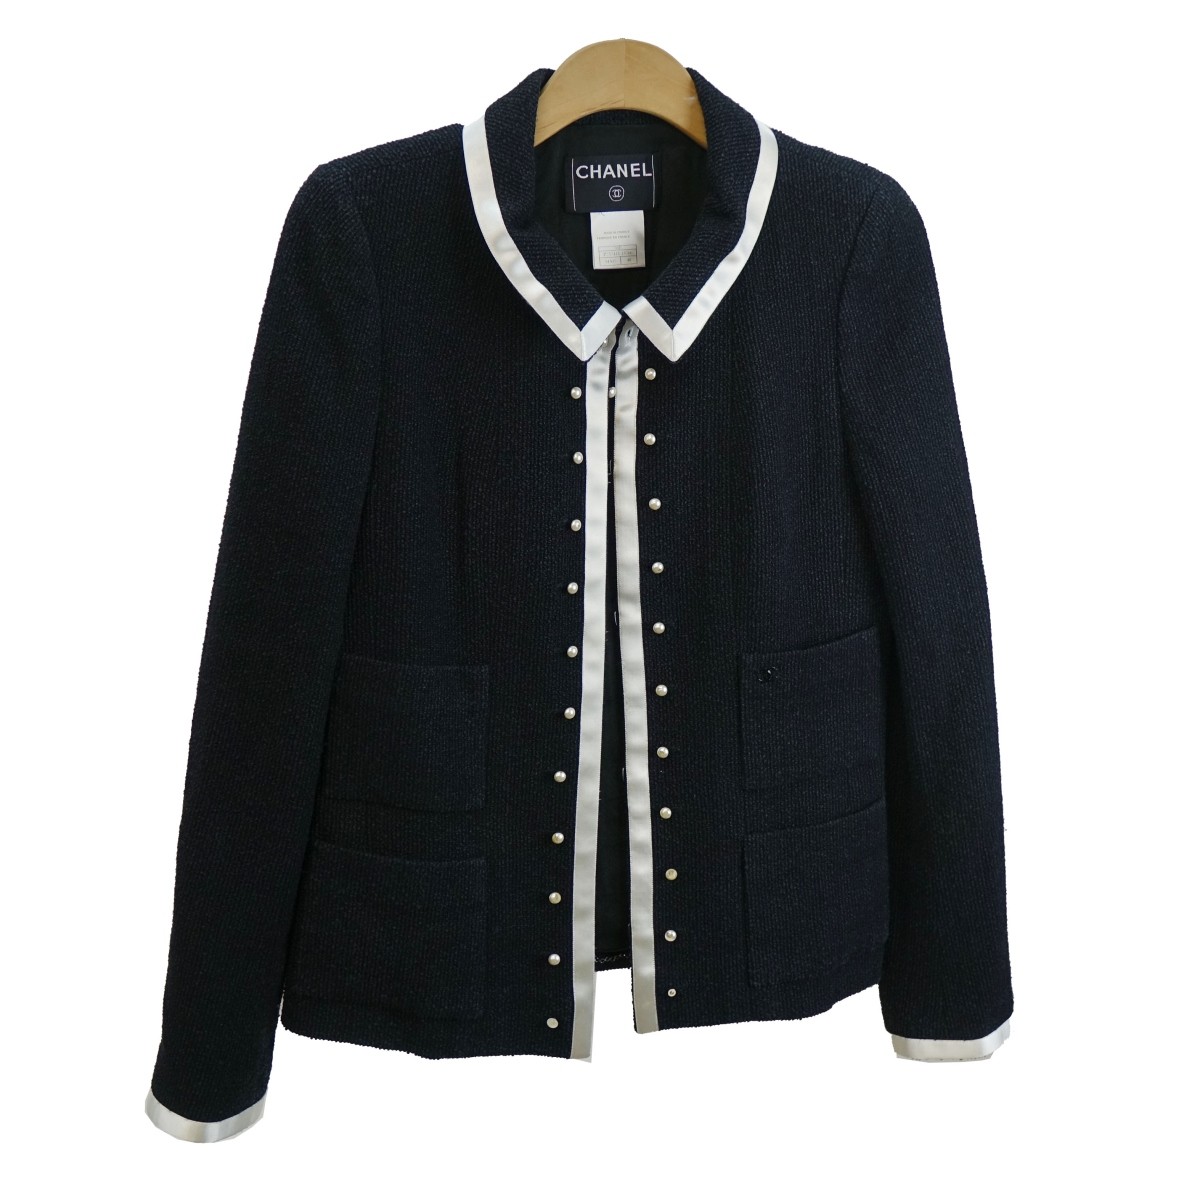 Chanel Wool Jacket | Kodner Auctions